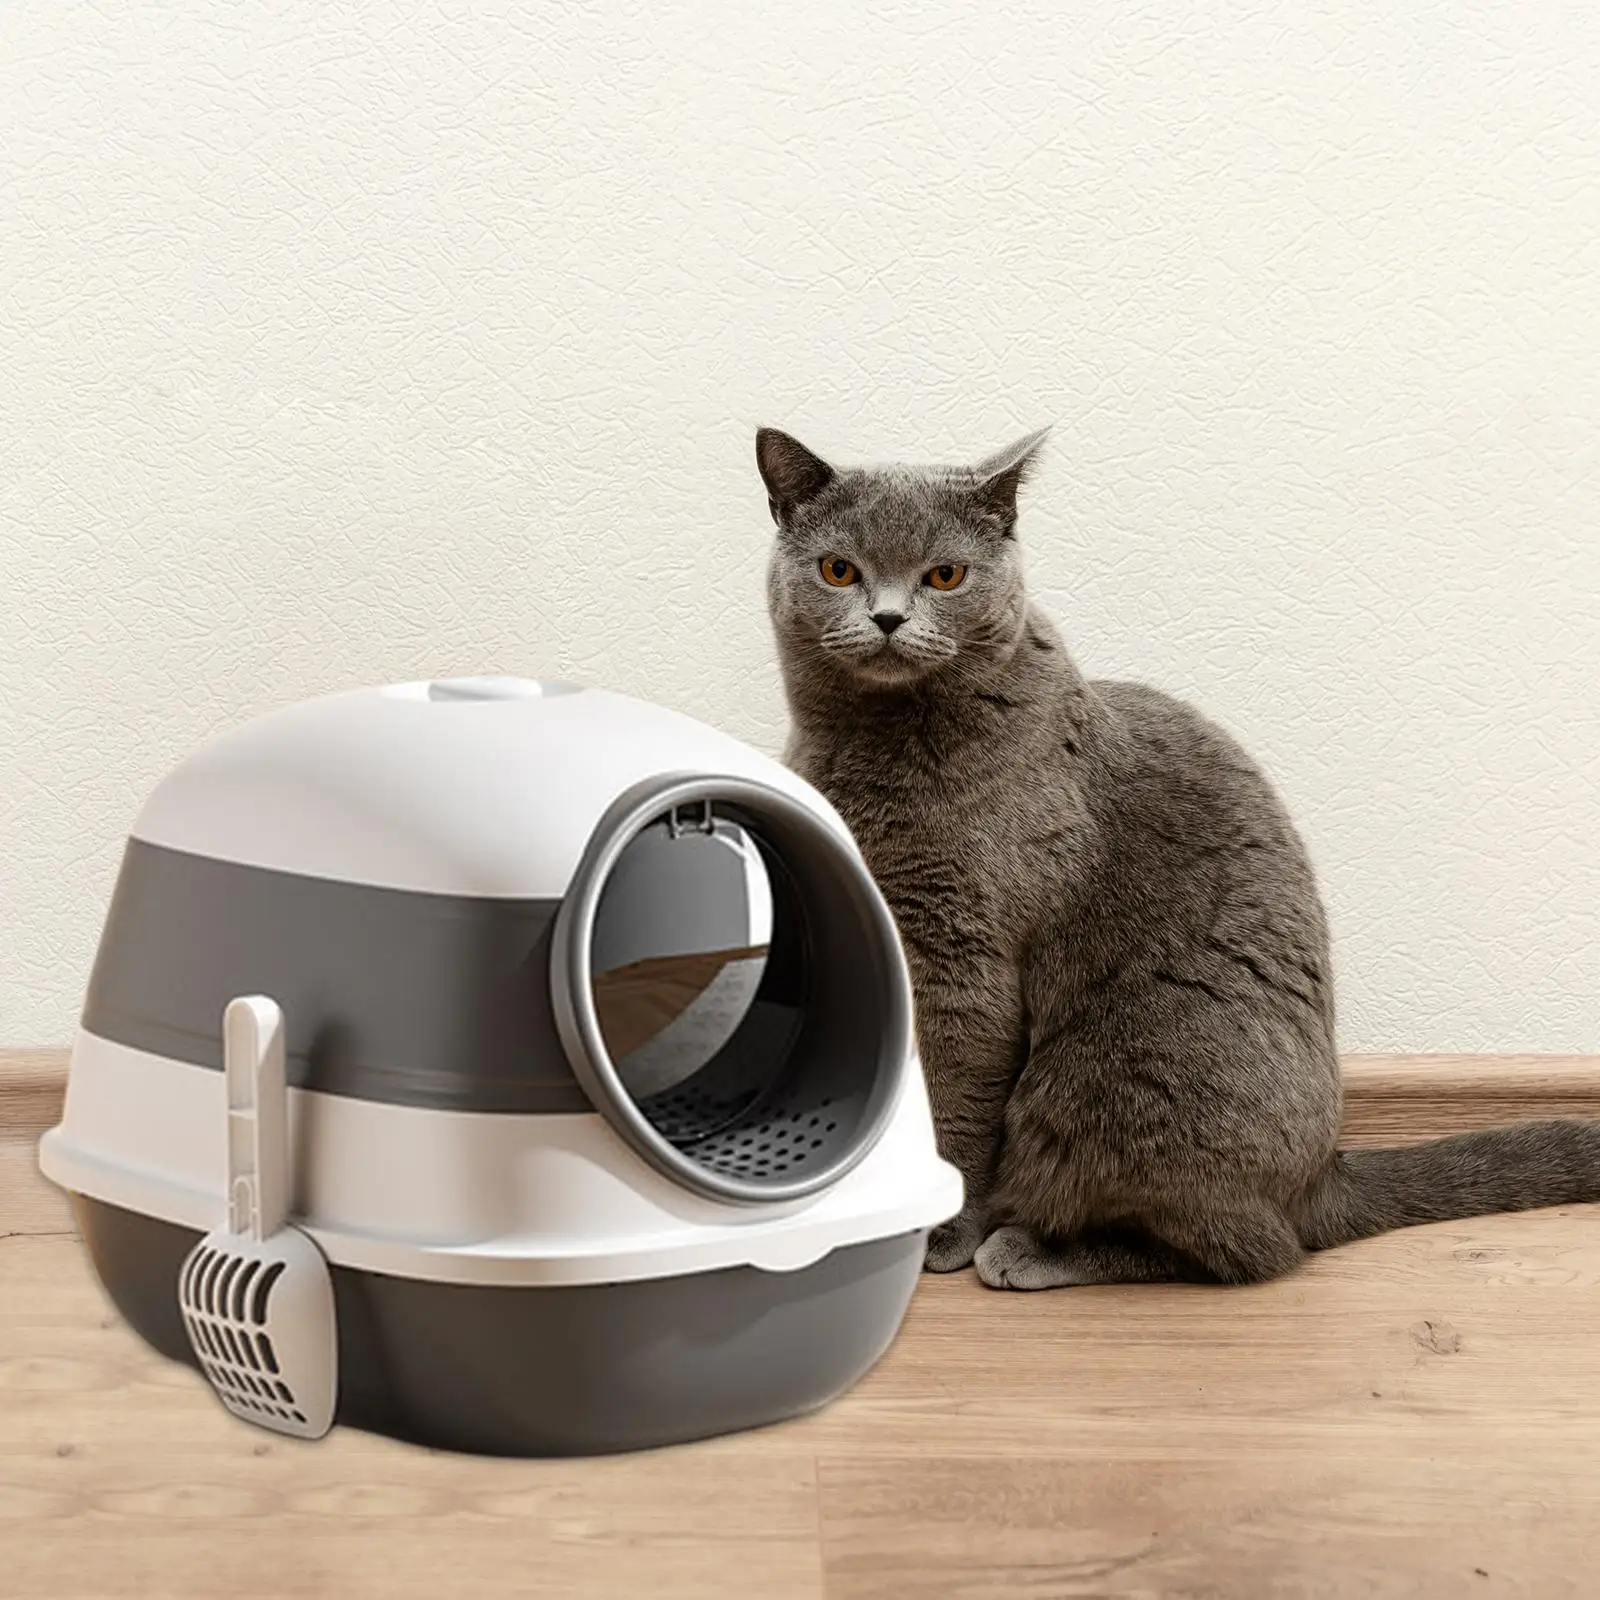 Hooded Cat Litter Box Cats Toilet Enclosed Splashproof with Shovel Detachable Kitty Litter Pan for Kitty Bunny Pet Accessories